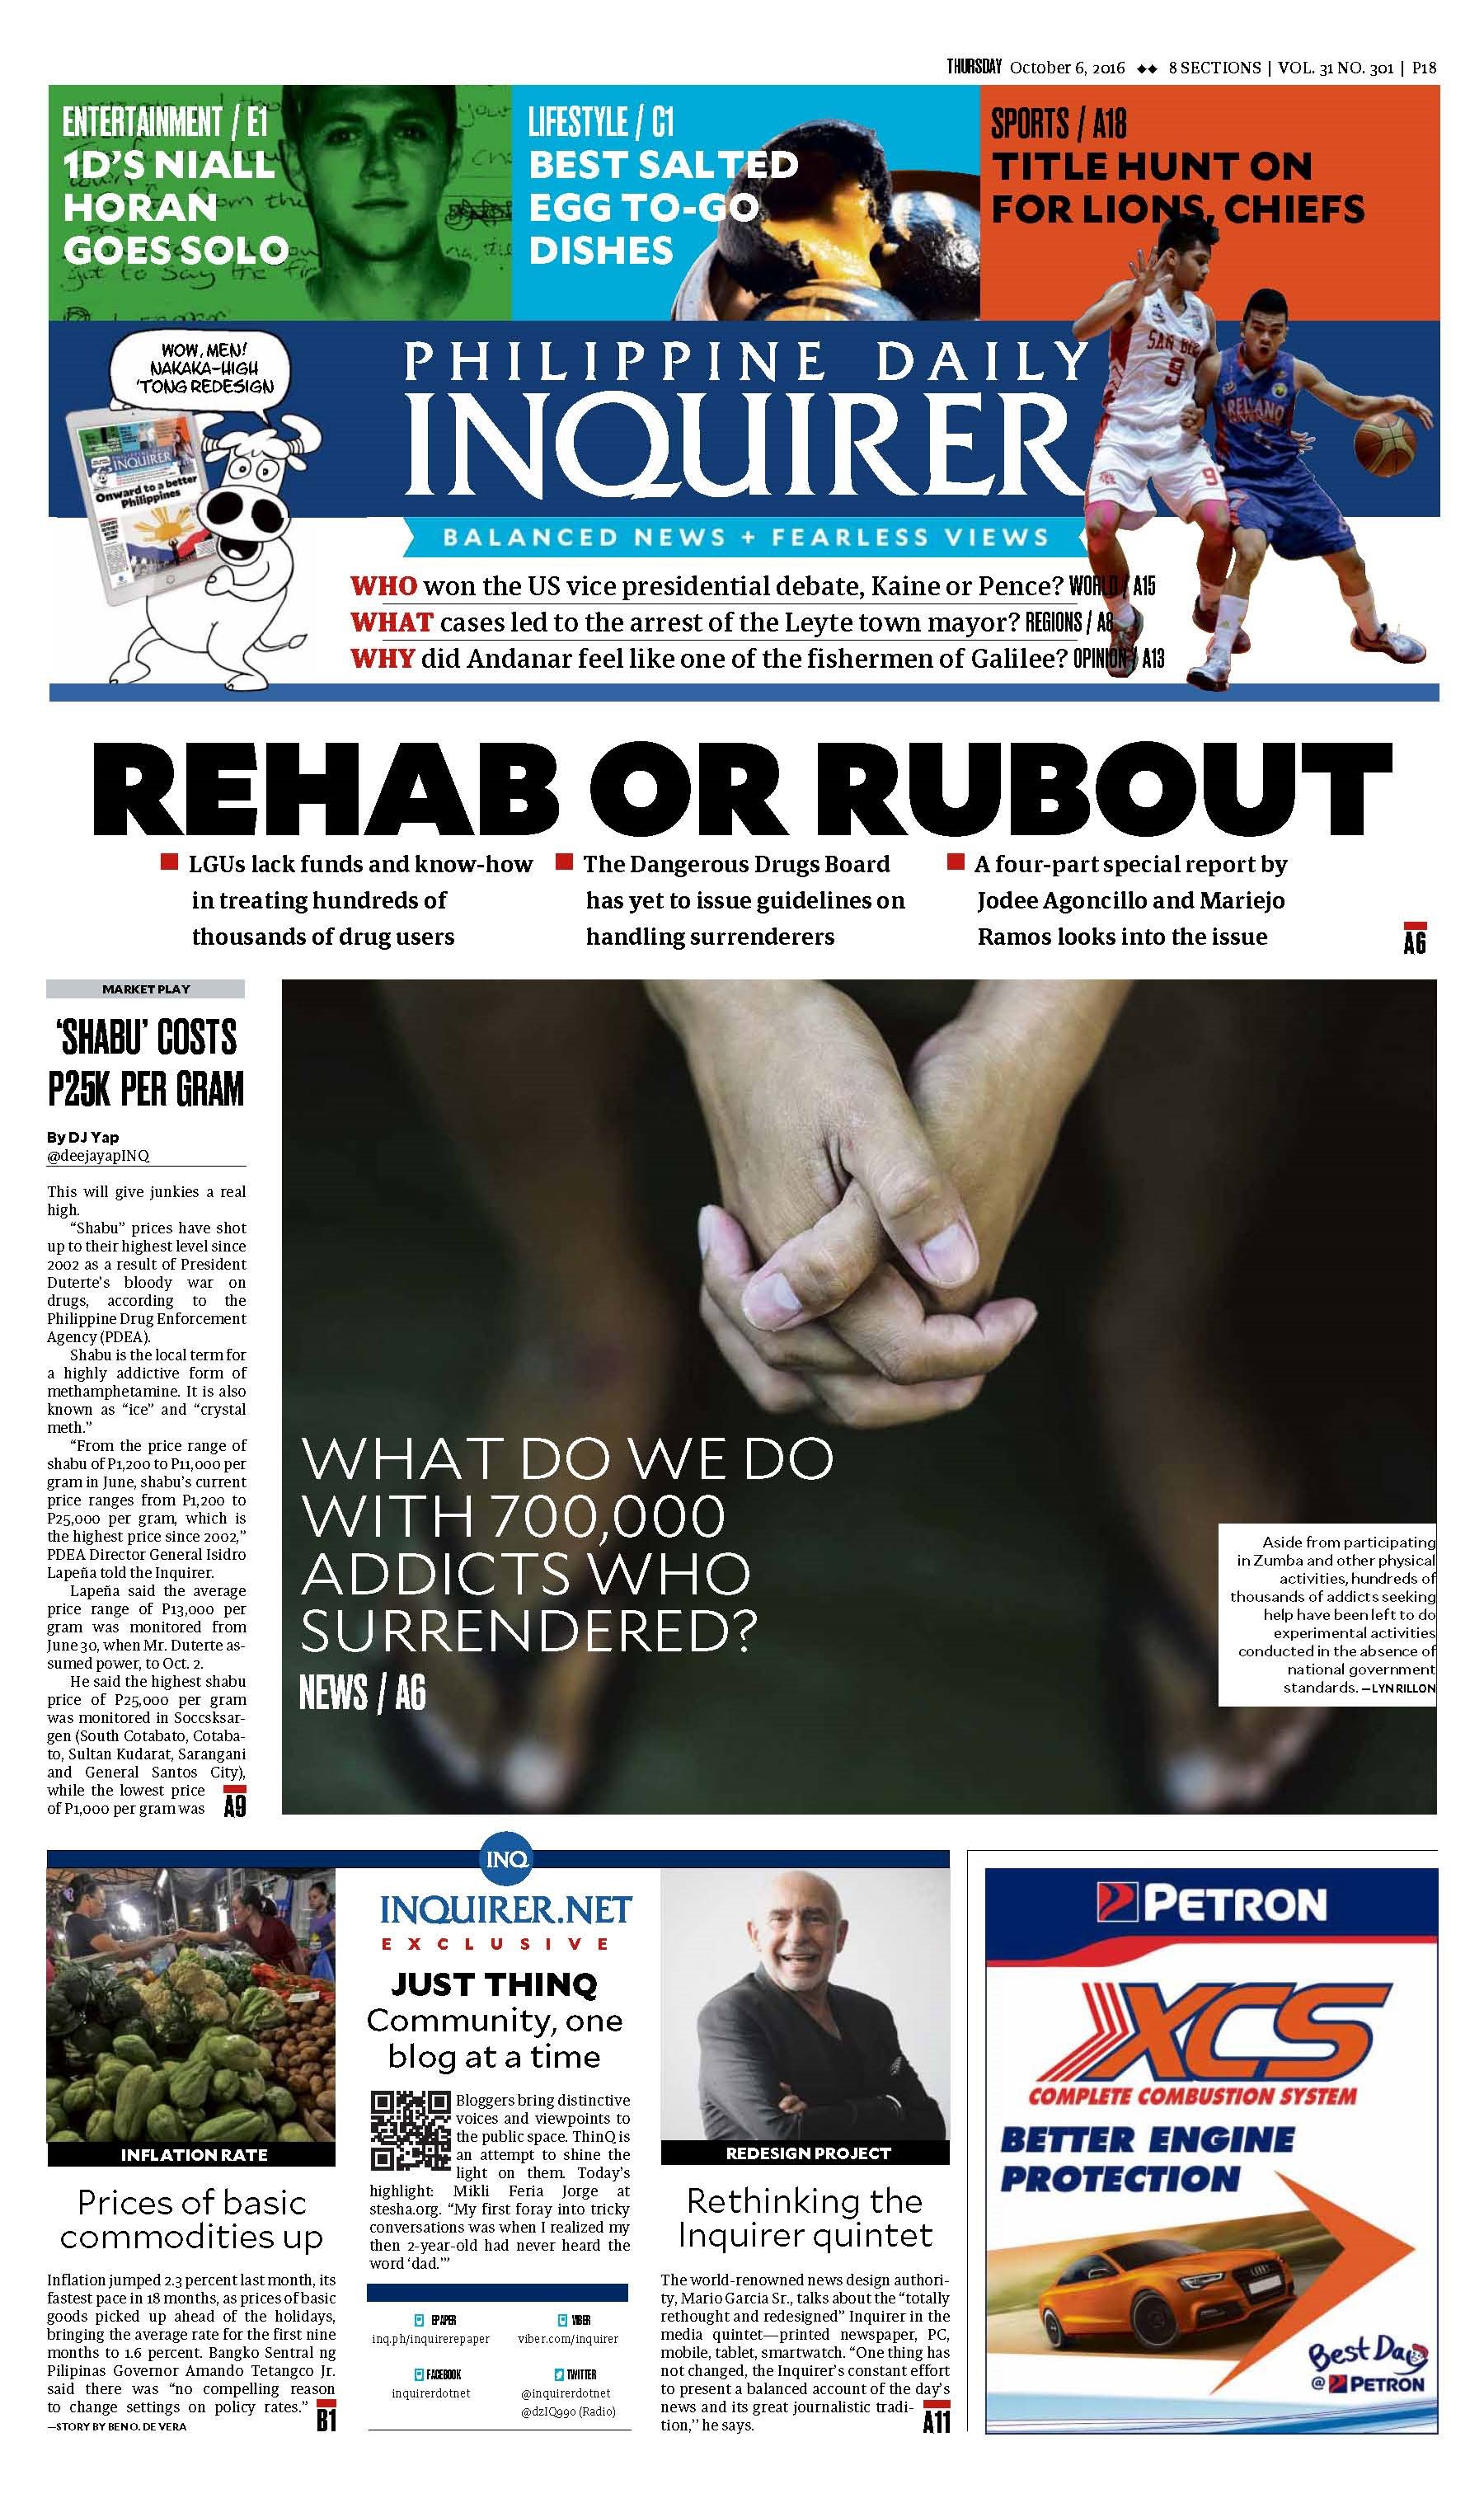 Blog The Philippine Daily Inquirer it’s a new look, new rethink